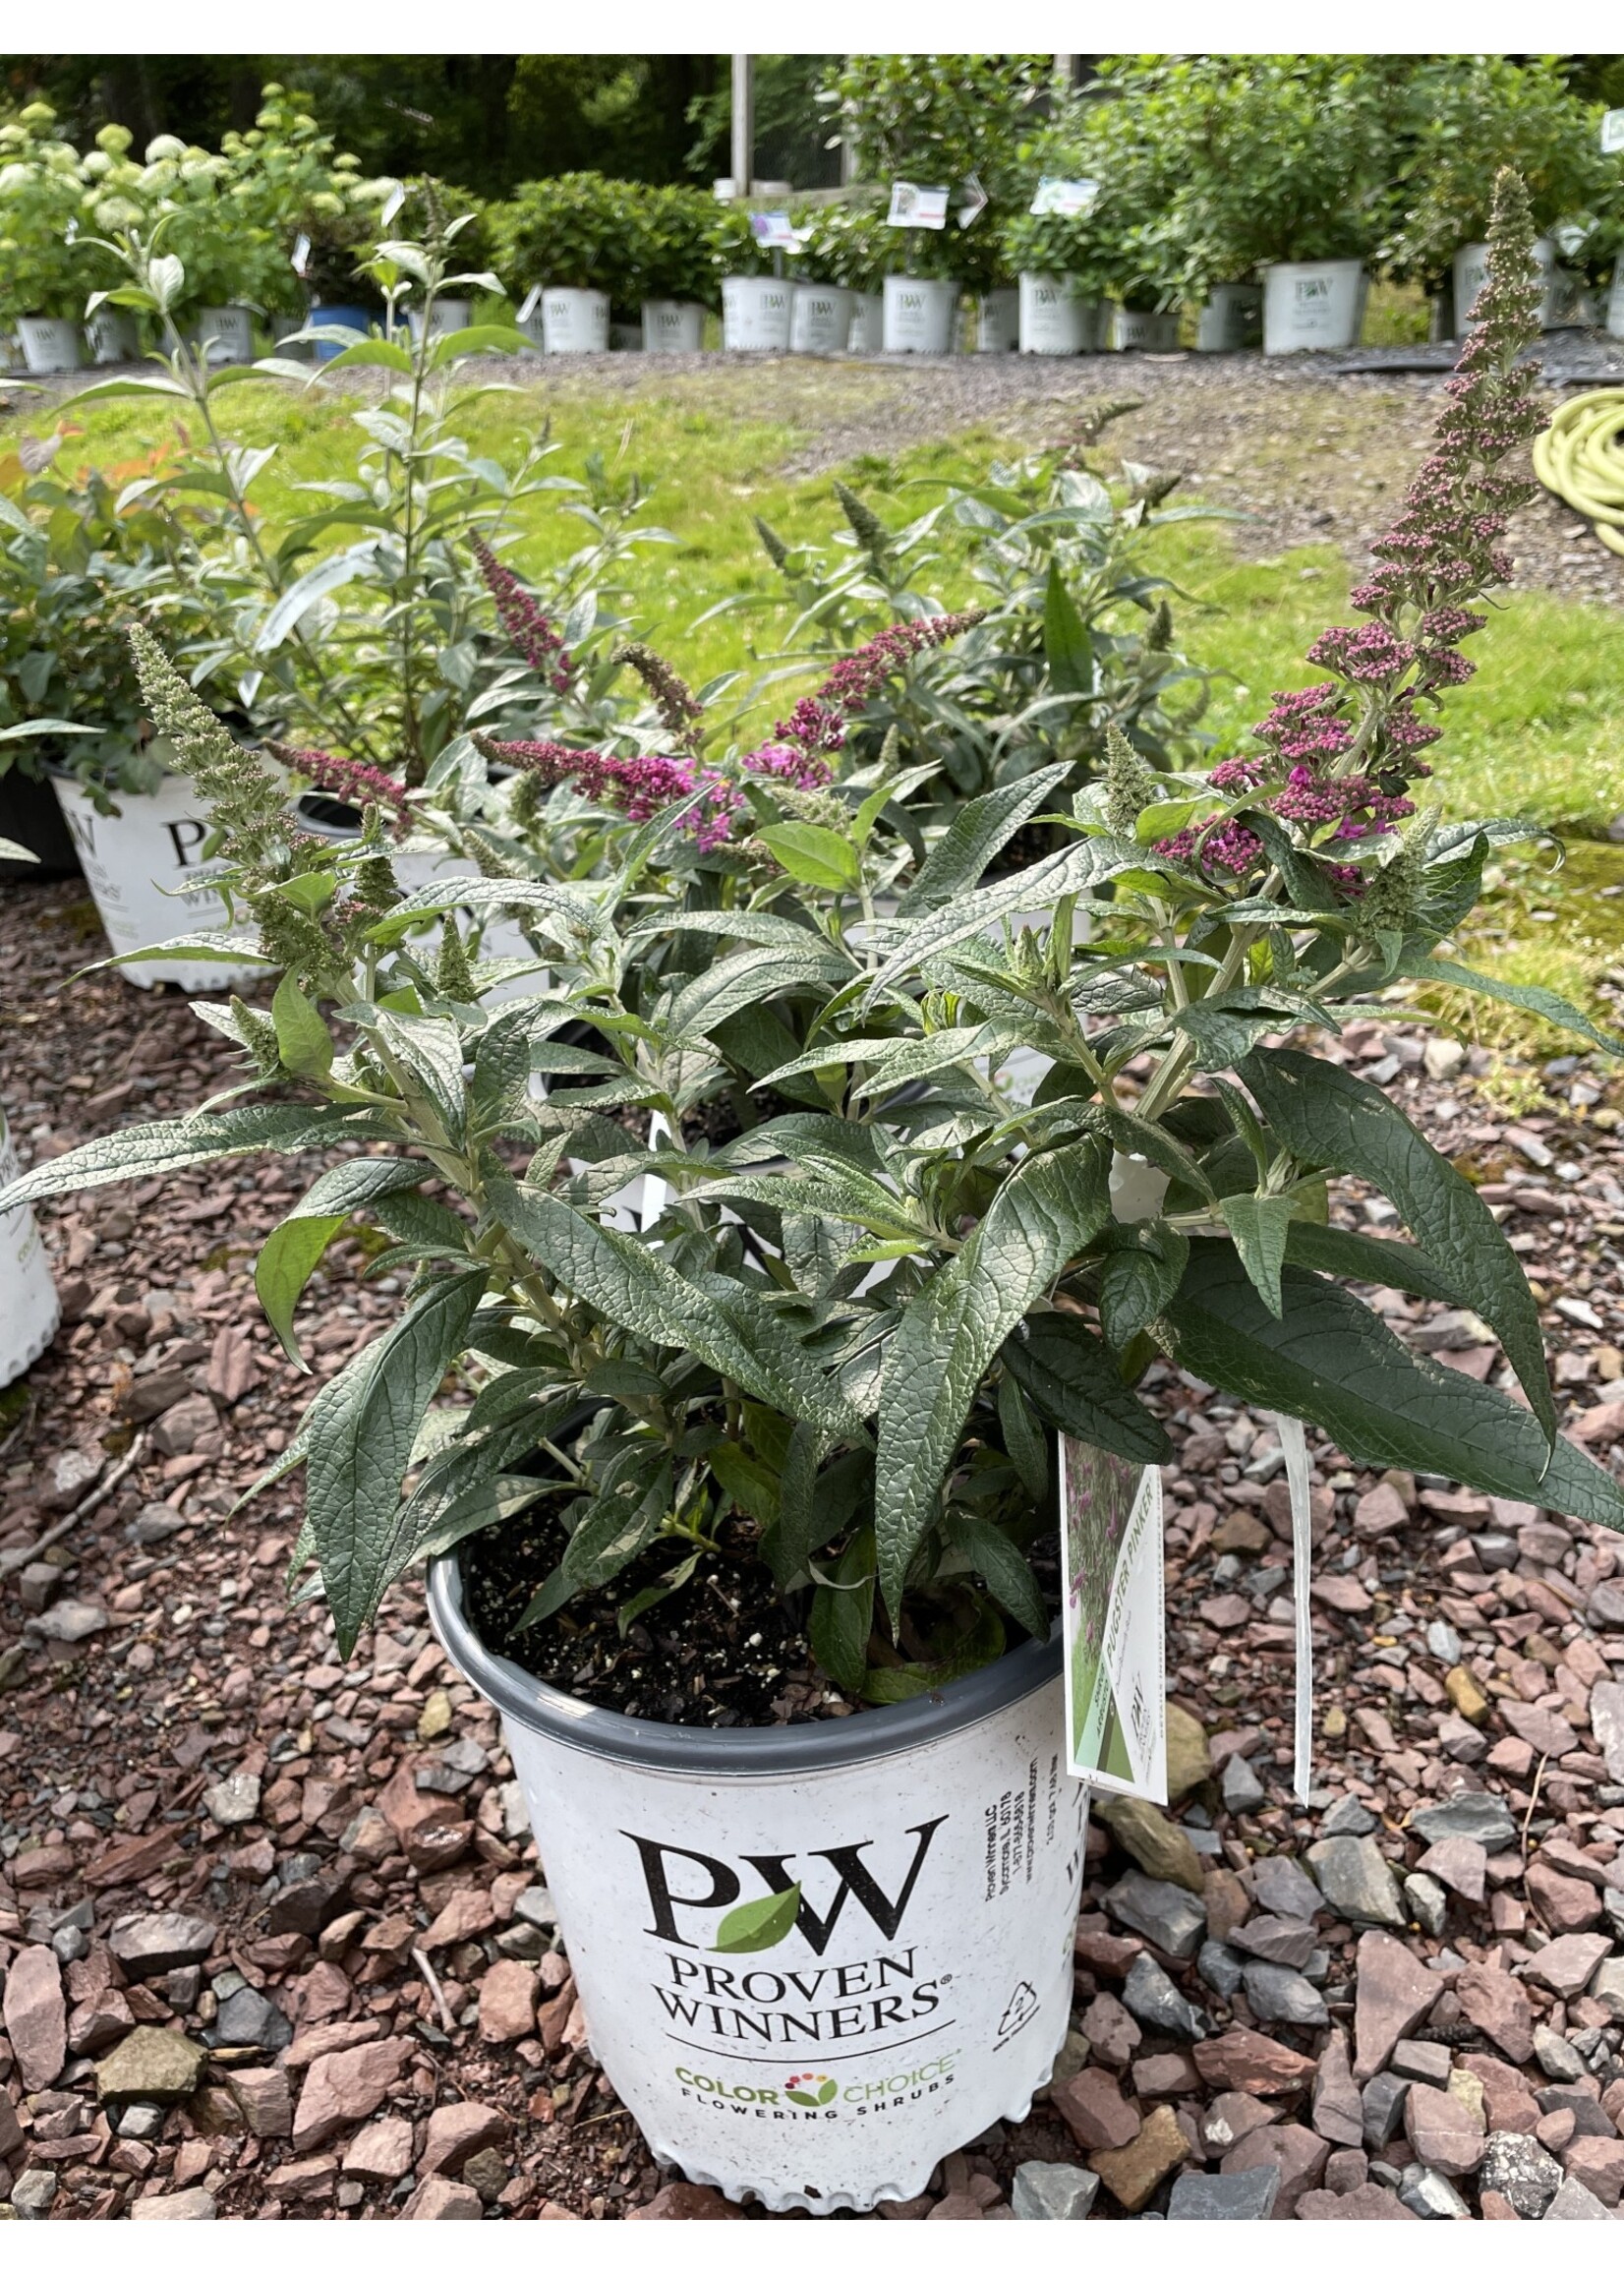 Buddleia x Pugster Pinker, butterfly bush #3 container